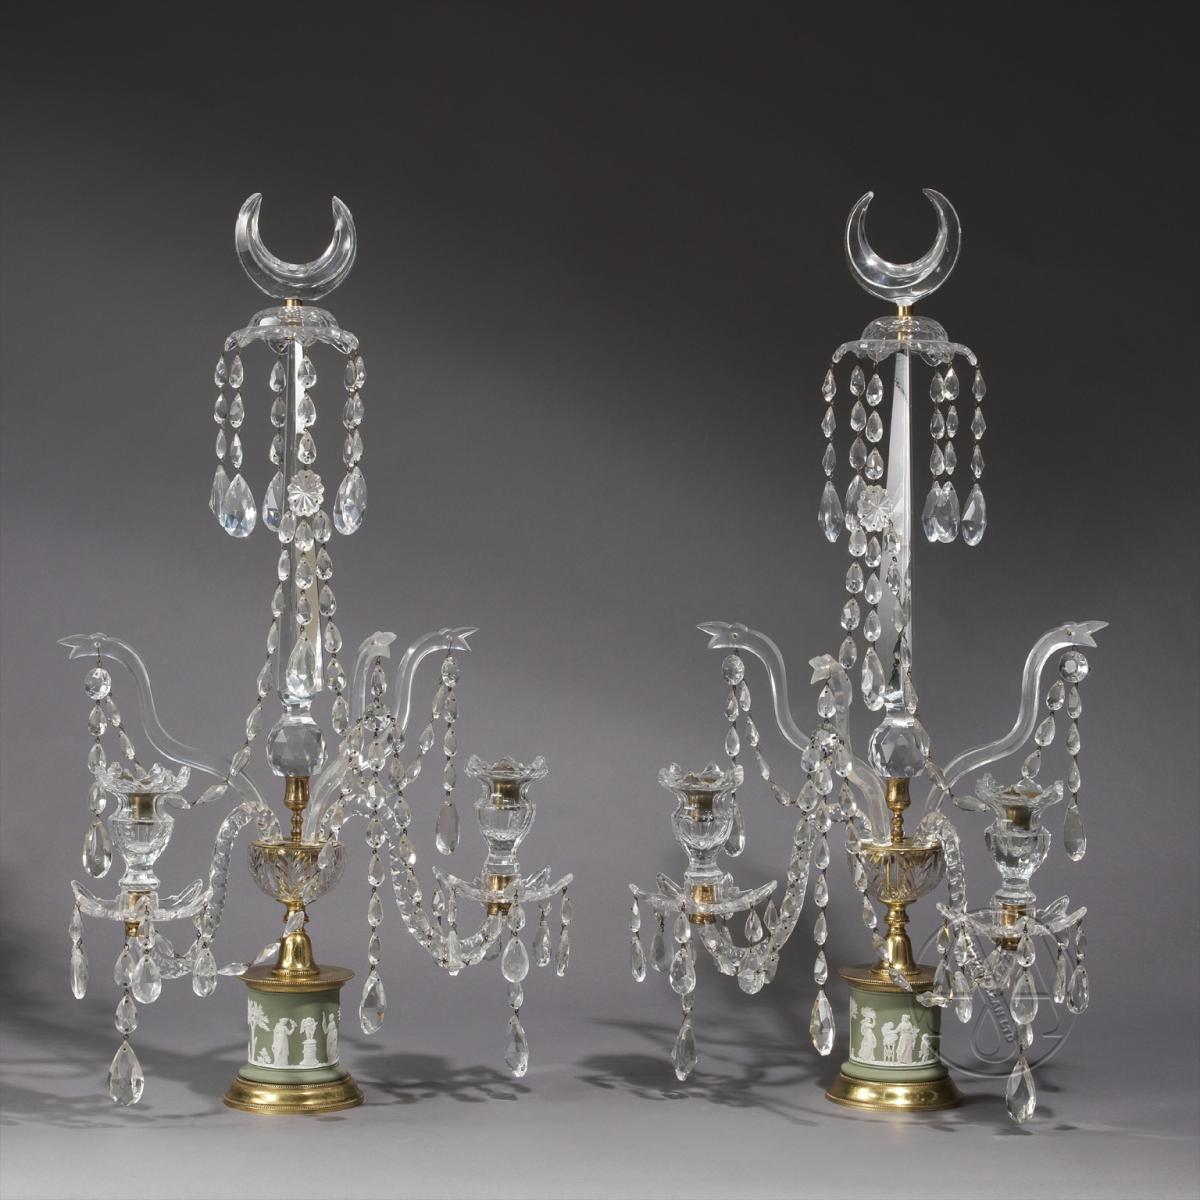 Pair of George III Style Cut-Glass and Gilt-Bronze Mounted Two-Light Candelabra